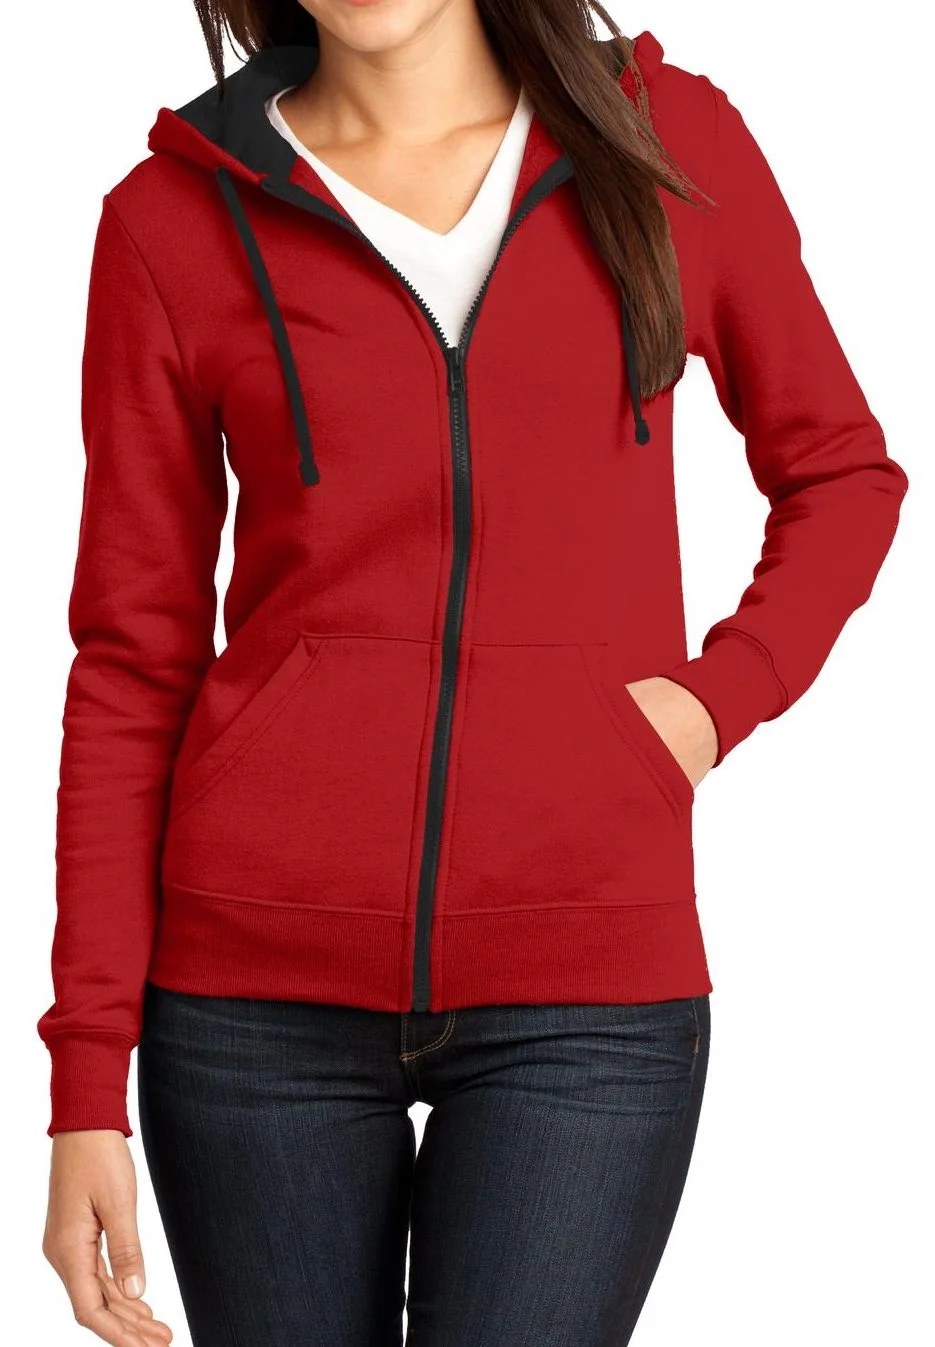 Wholesale Ladies Zipped Hooded Sweater Jacket Manufacturer In Bangladesh Factory